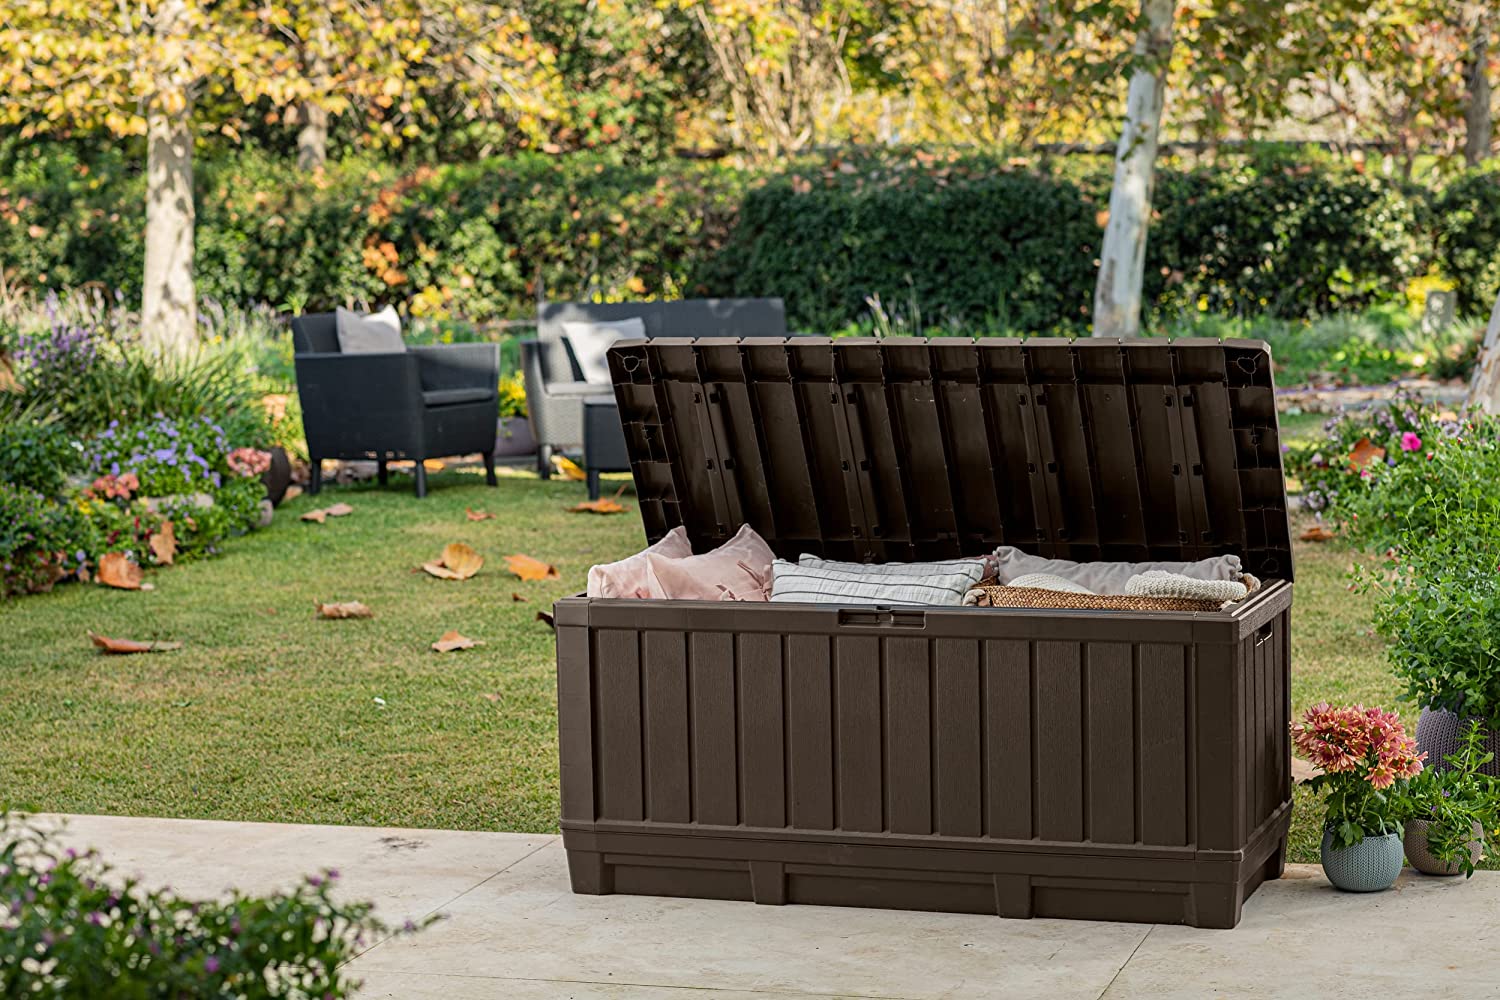 https://bigbigmart.com/wp-content/uploads/2023/05/Keter-Kentwood-90-Gallon-Resin-Deck-Box-Organization-and-Storage-for-Patio-Furniture-Outdoor-Cushions-Throw-Pillows-Garden-Tools-and-Pool-Toys-Brown8.jpg